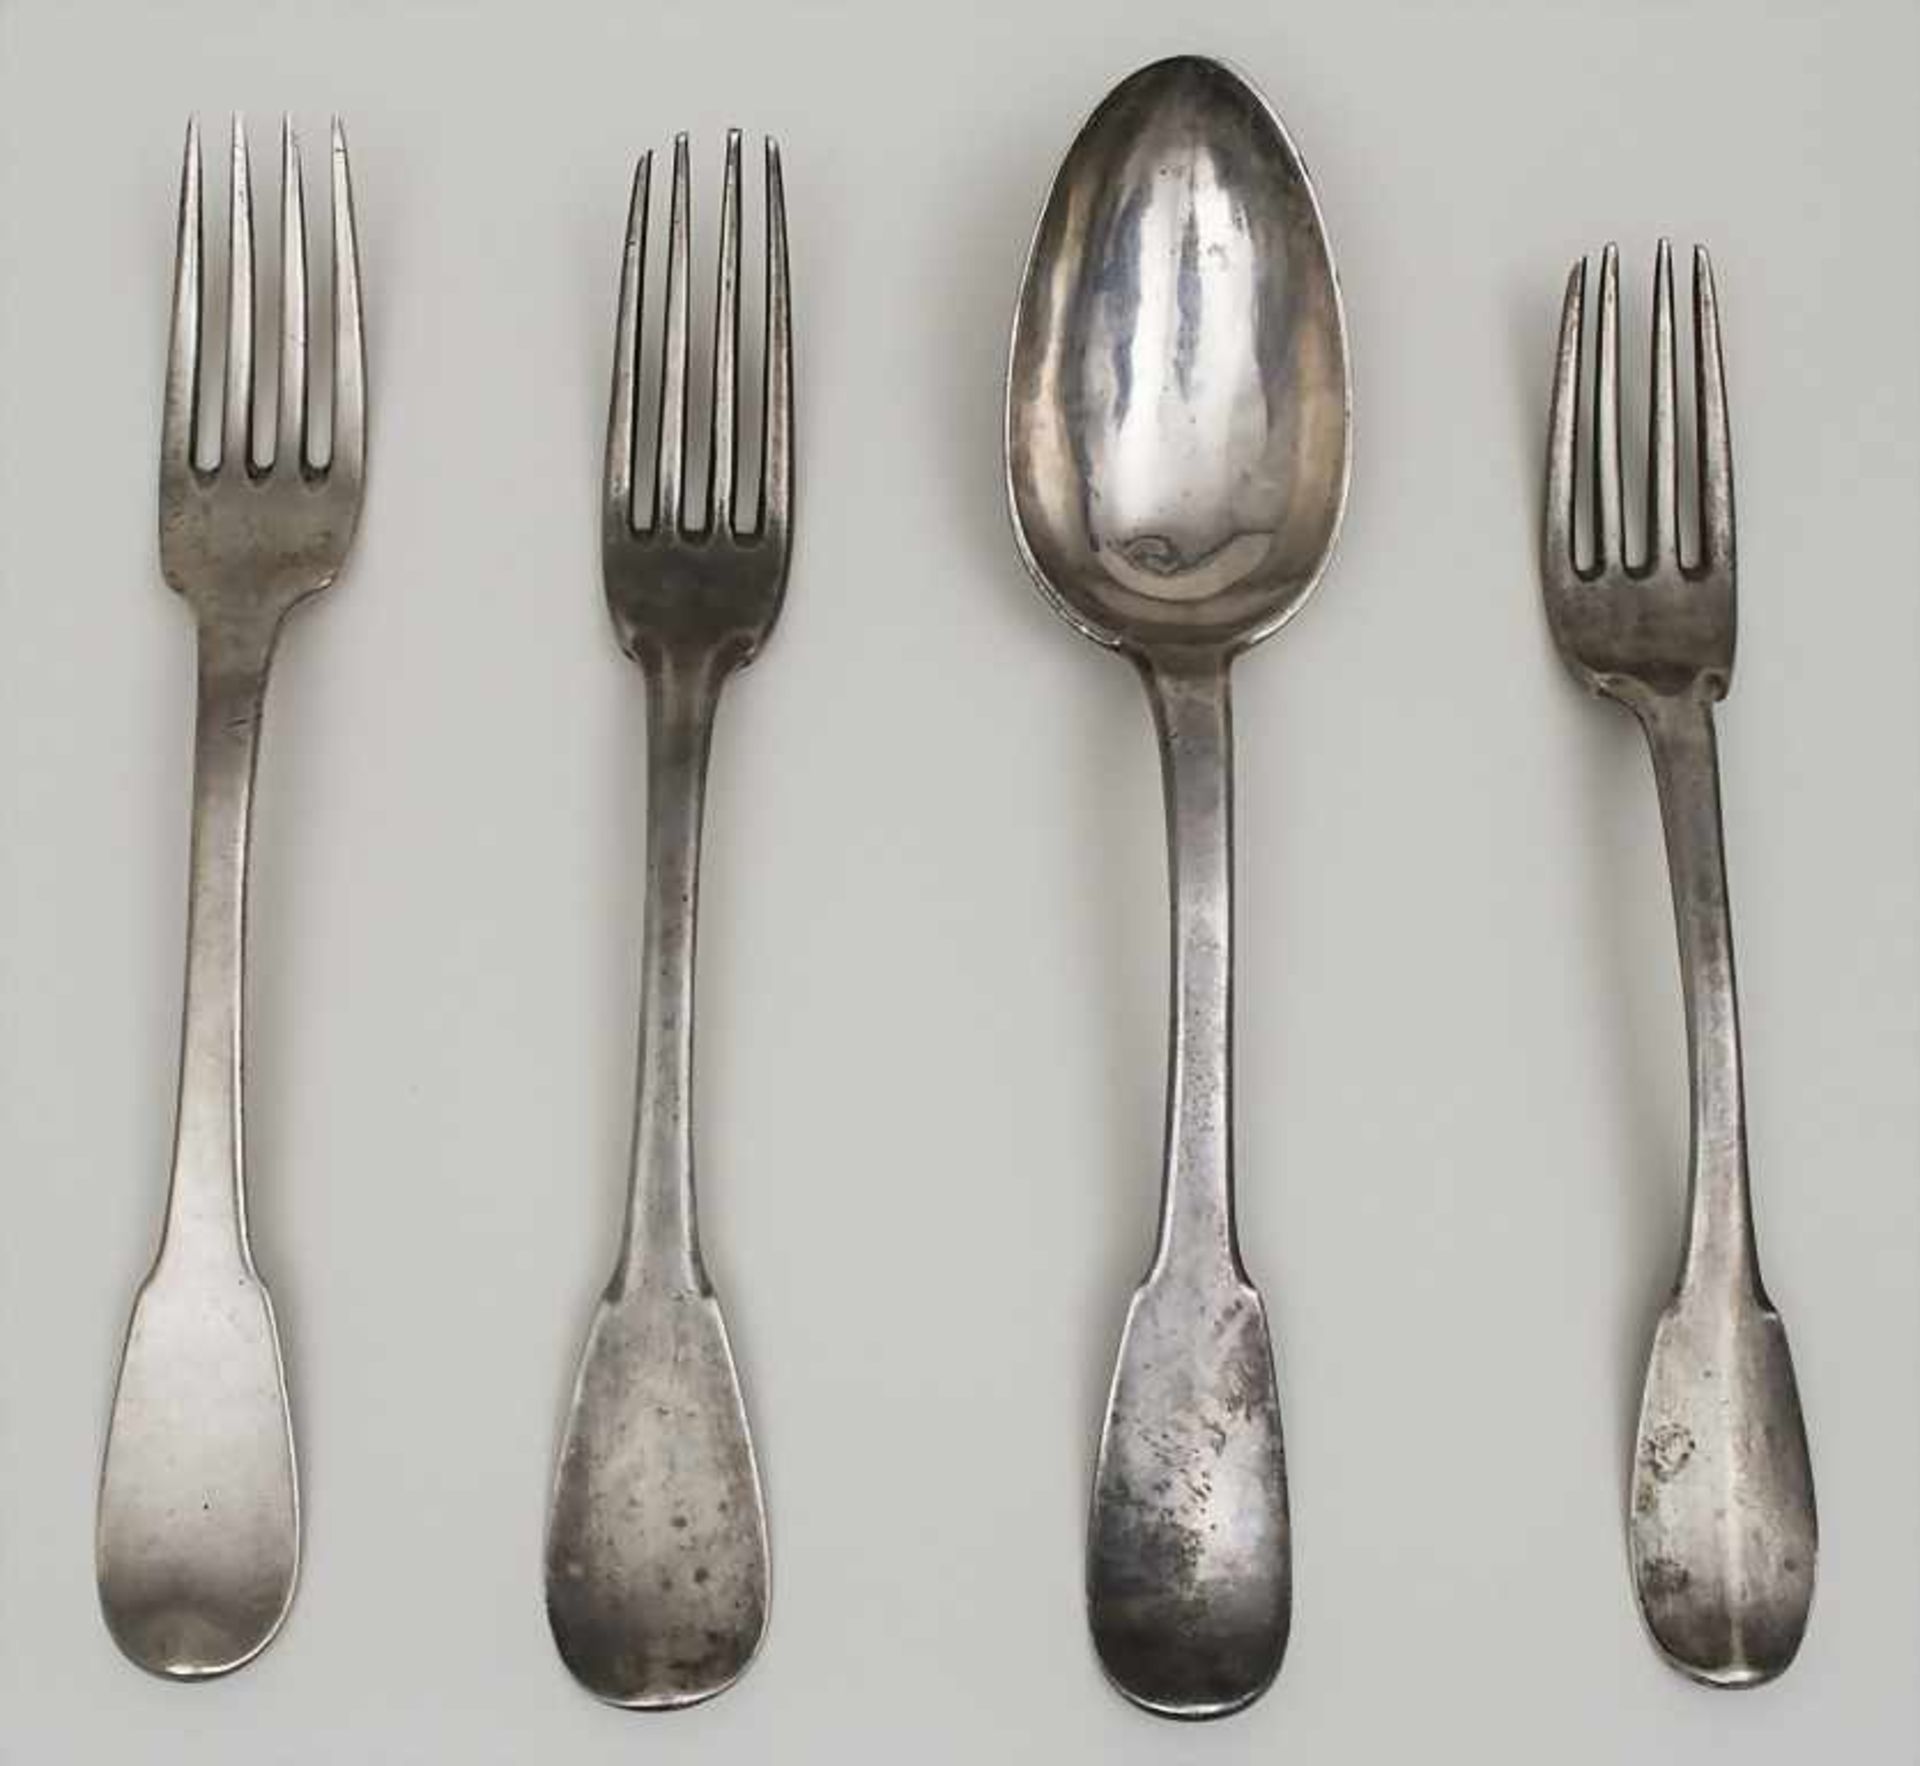 4 Teile Silberbesteck / 4 pieces silver cutlery, Frankreich / France, 18. Jh.Material: Silber 950,